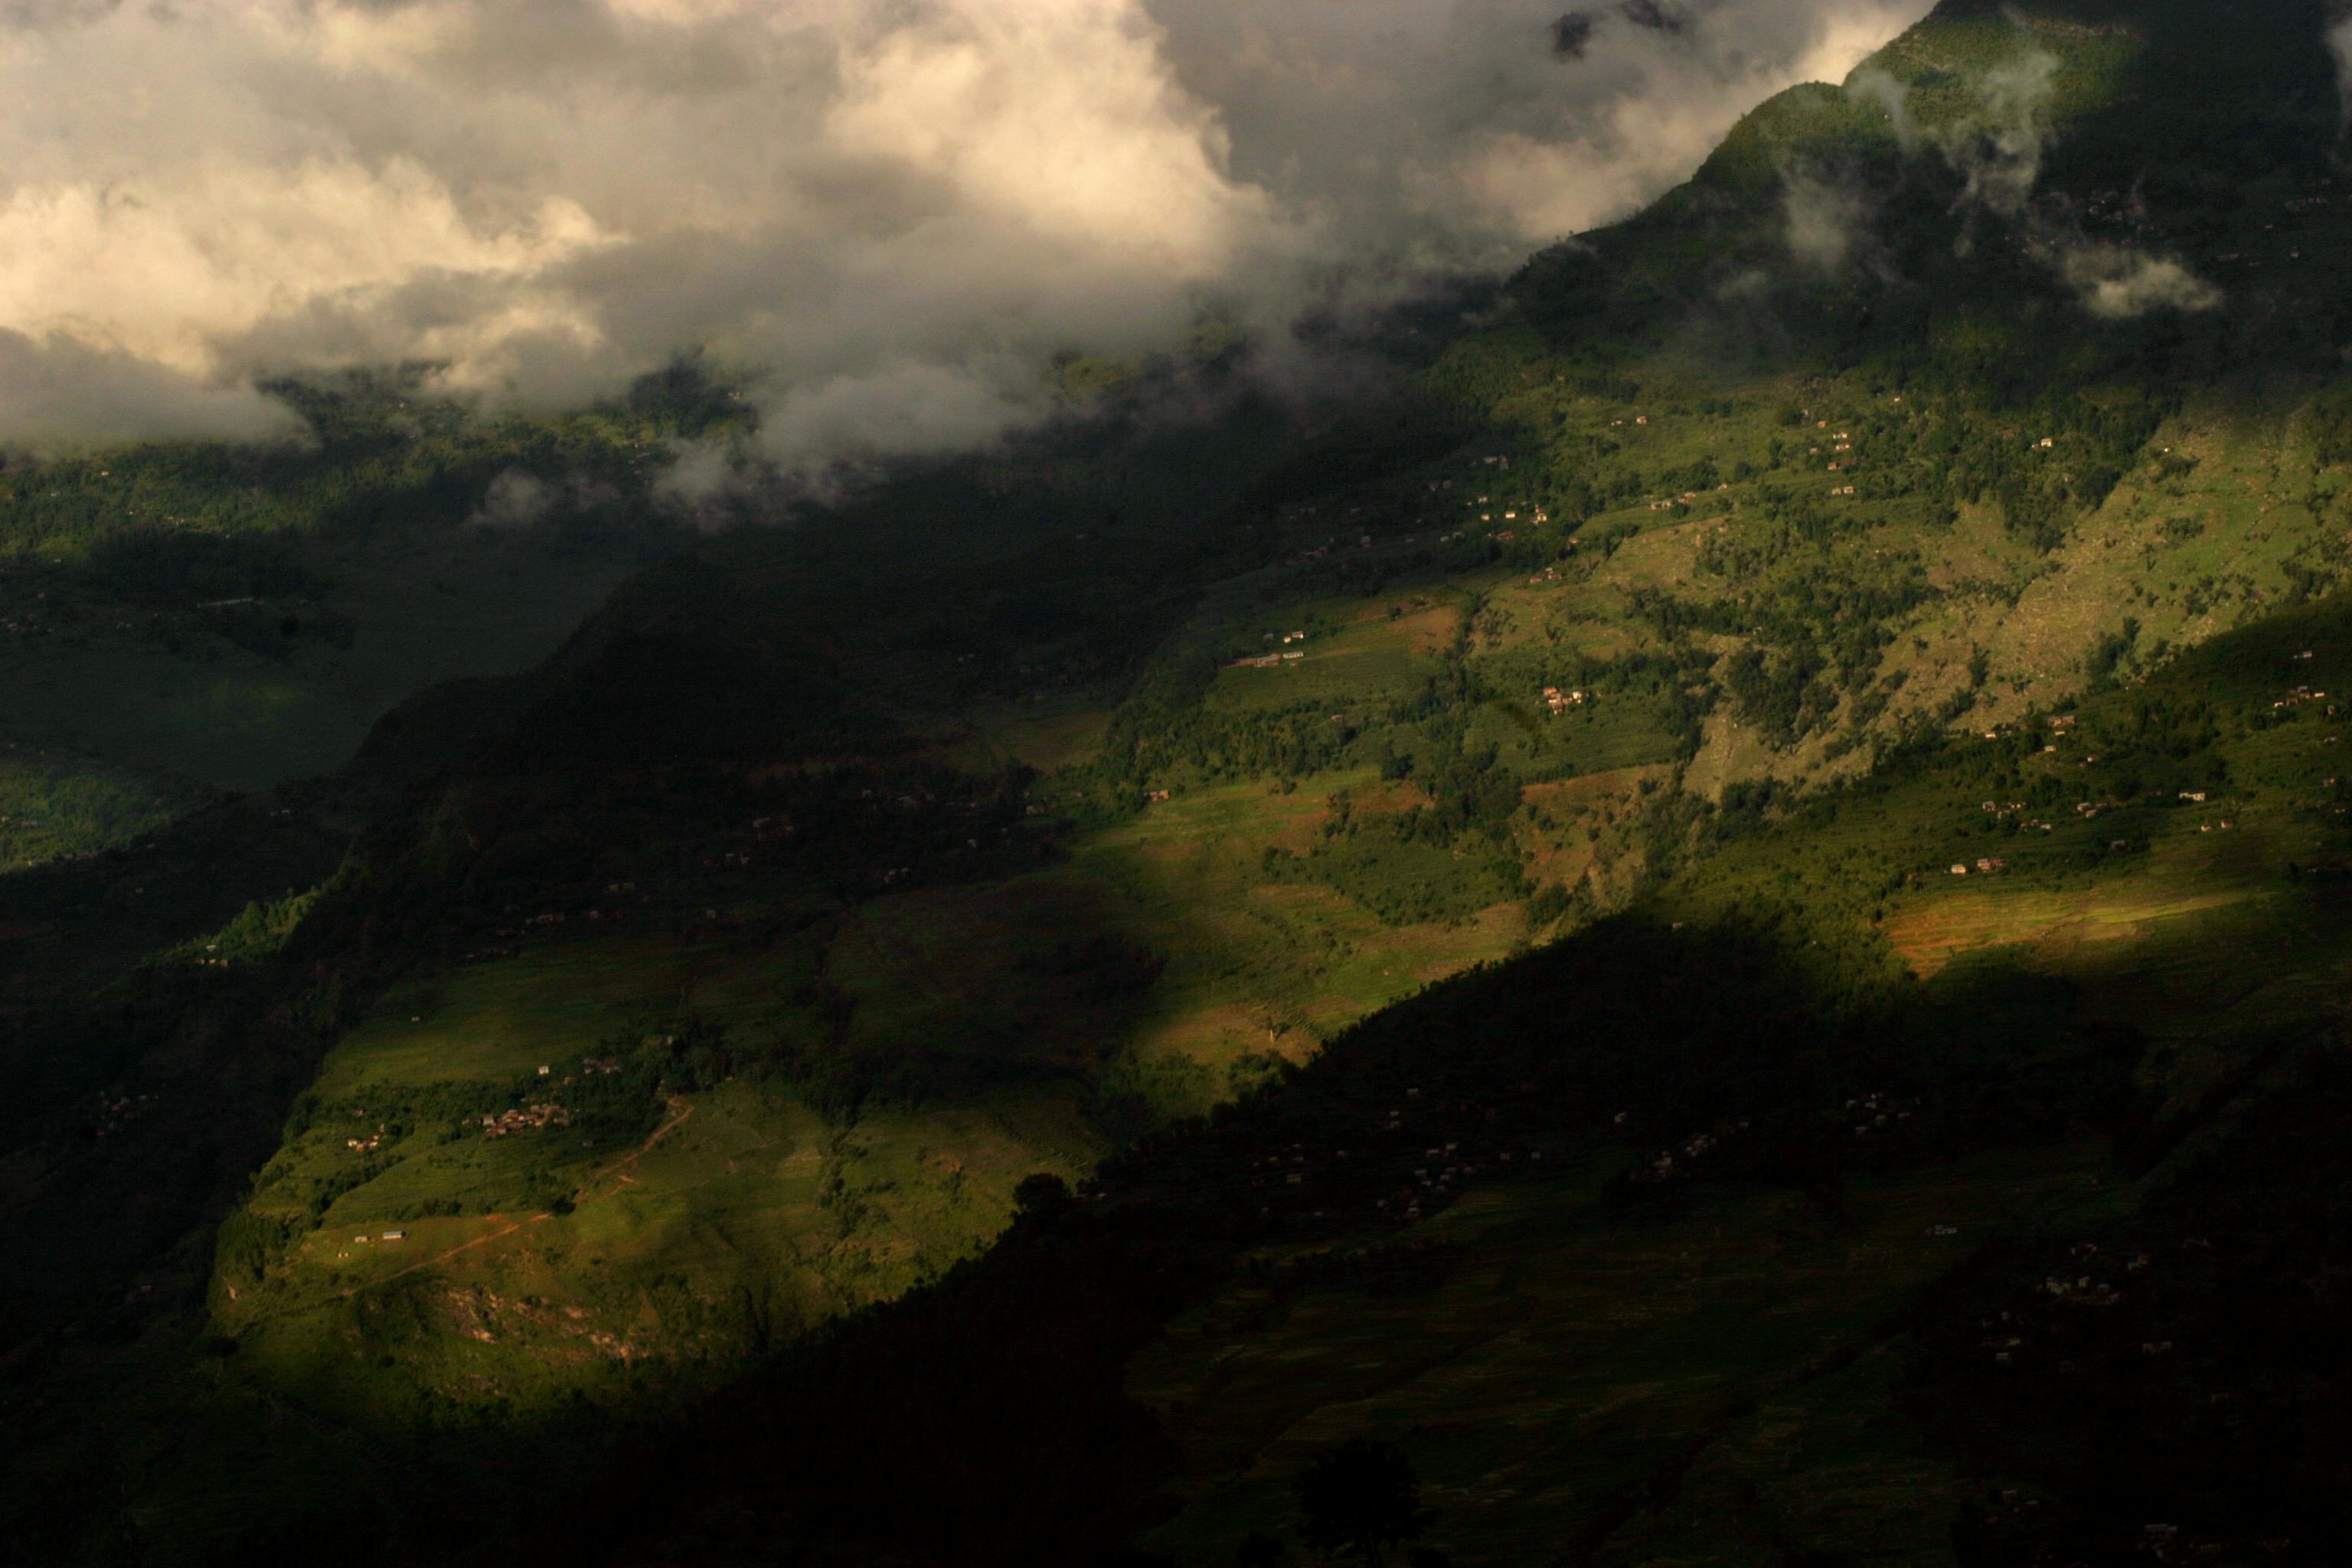 Monsoon in the Nepali Himalayas in 2006.